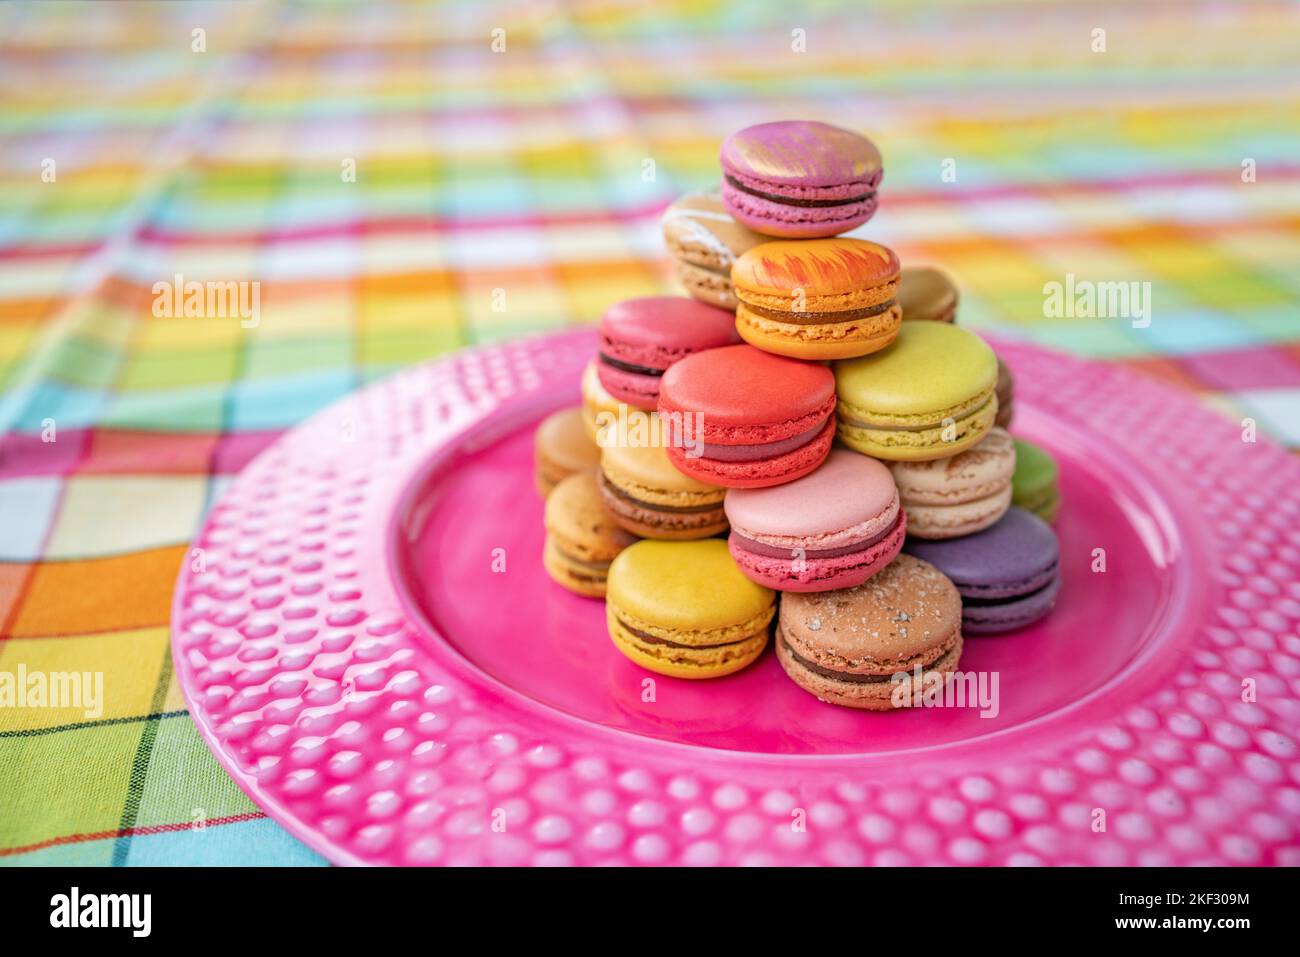 French pastry macarons tower presentation on pink dessert plate at bakery. Retro vintage checkered tablecloth table decor home kitchen. Assortment of Stock Photo